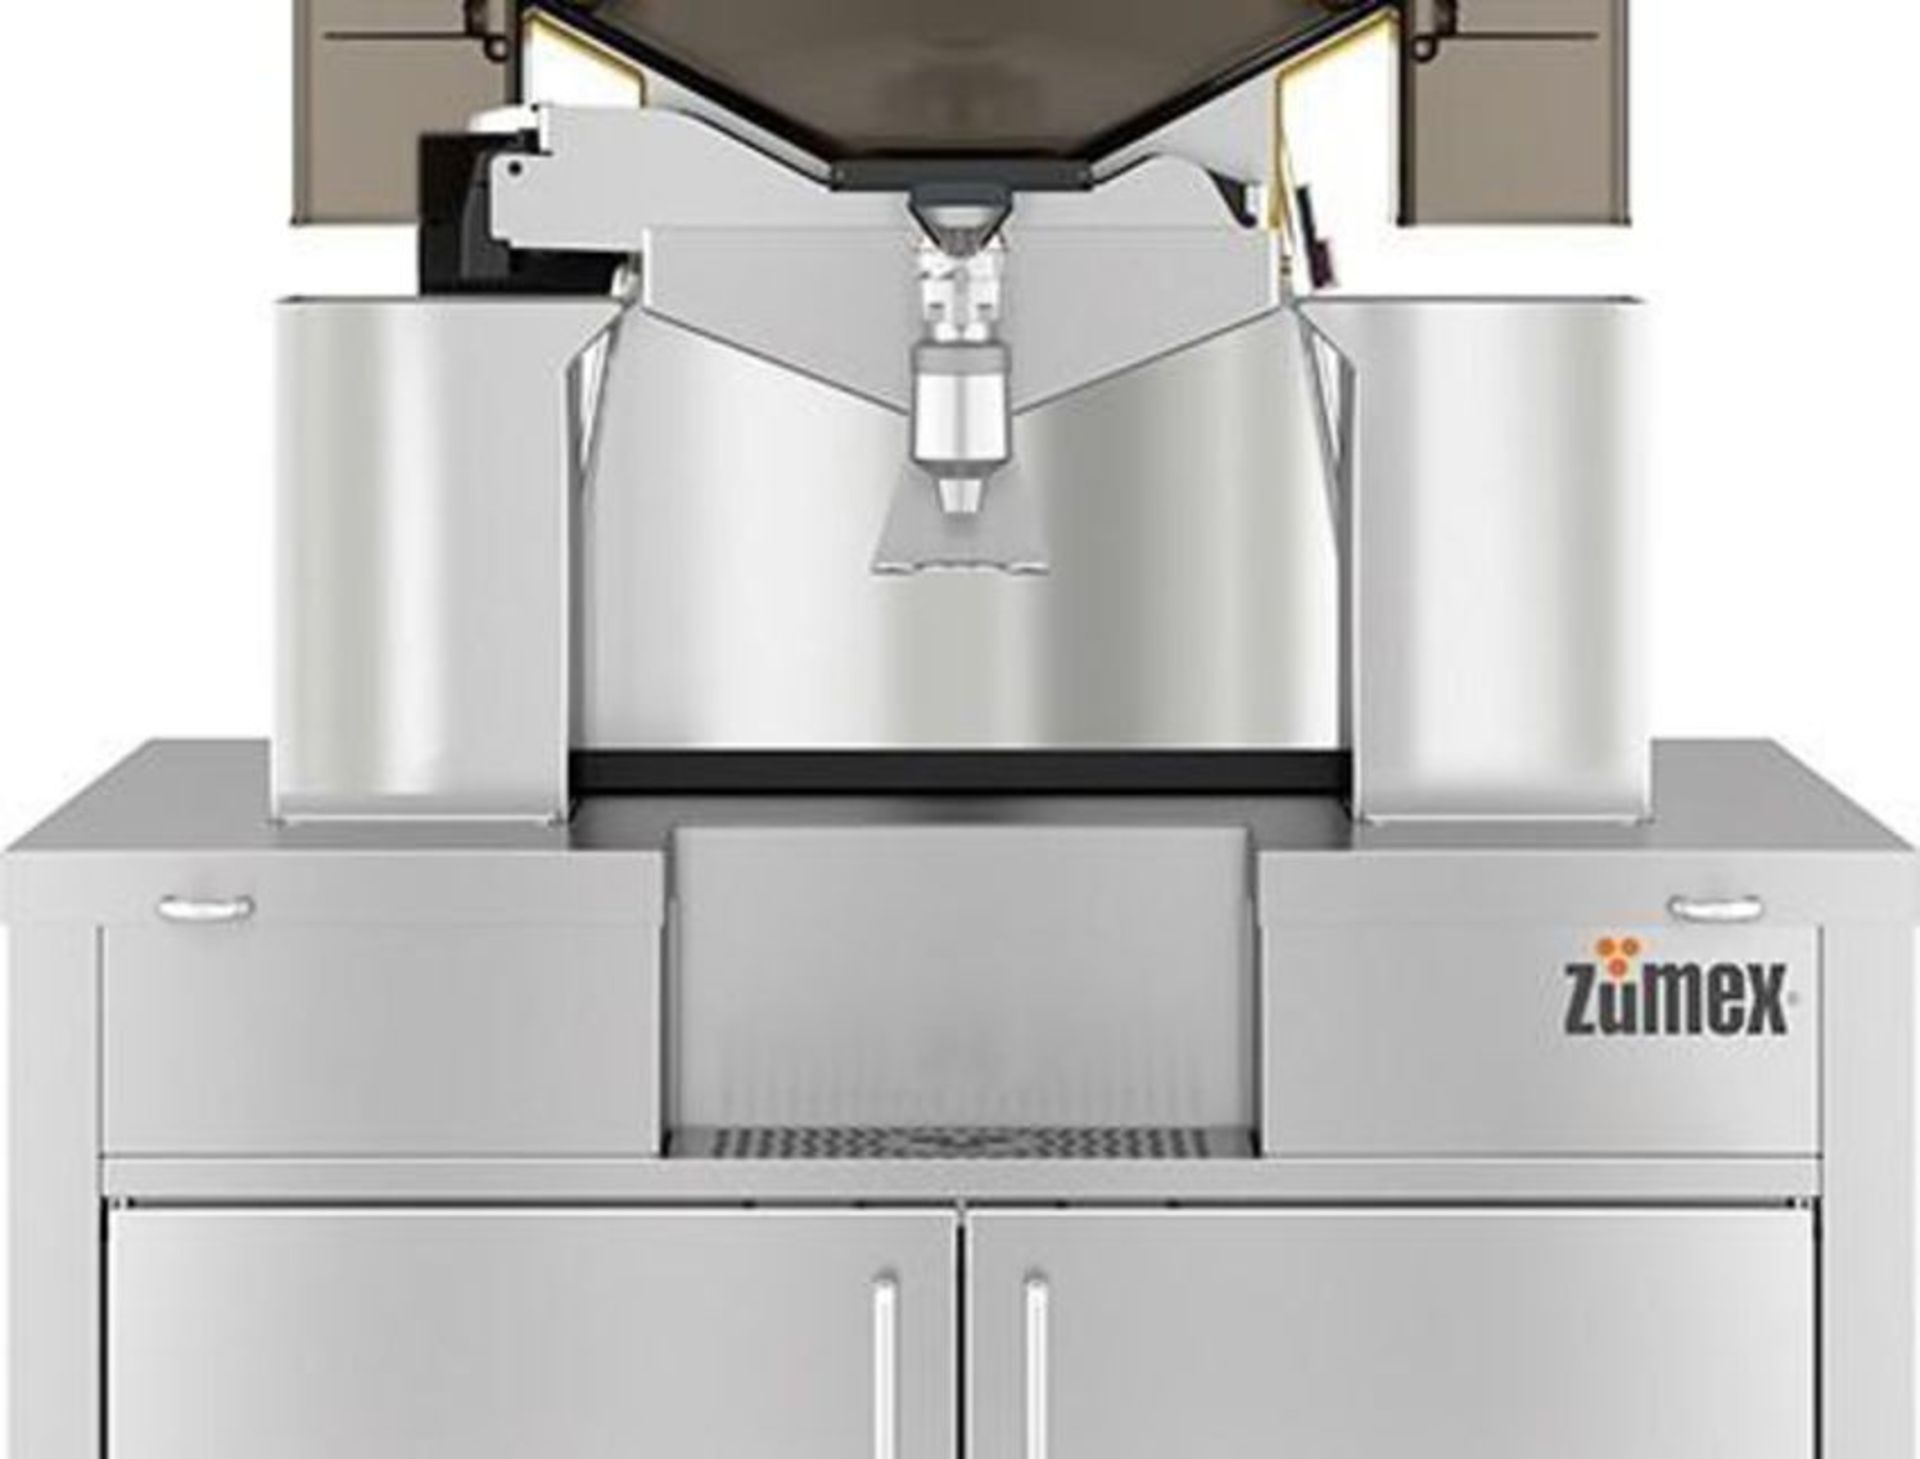 1 x Zumex Speed S +Plus Self-Service Podium Commercial Citrus Juicer - Manufactured in 2018 - Ideal - Image 7 of 14